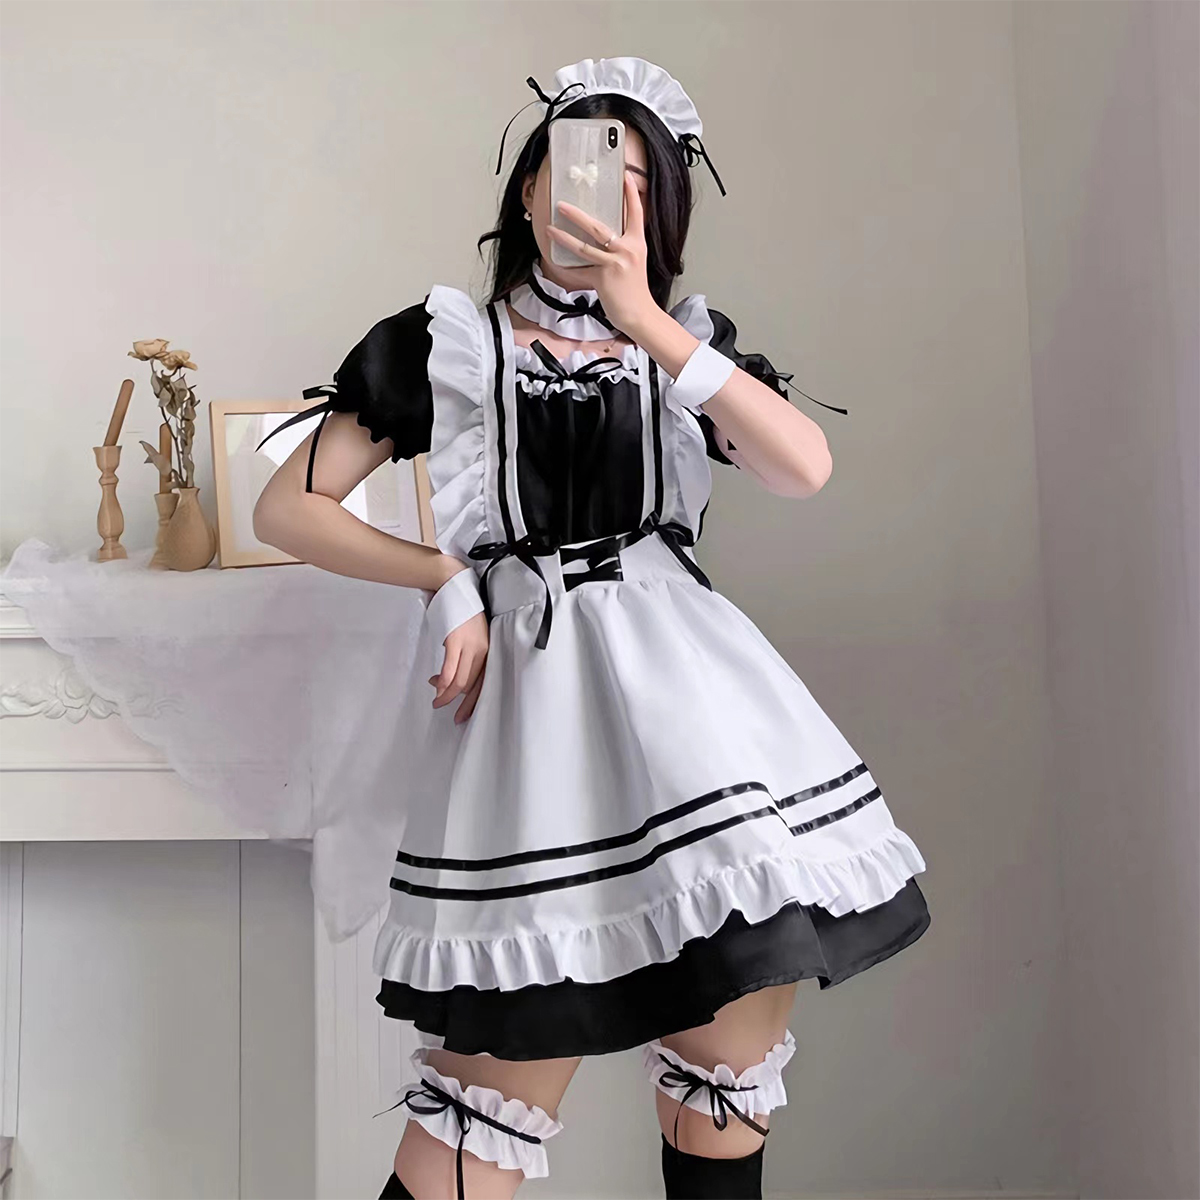 anime maid outfit